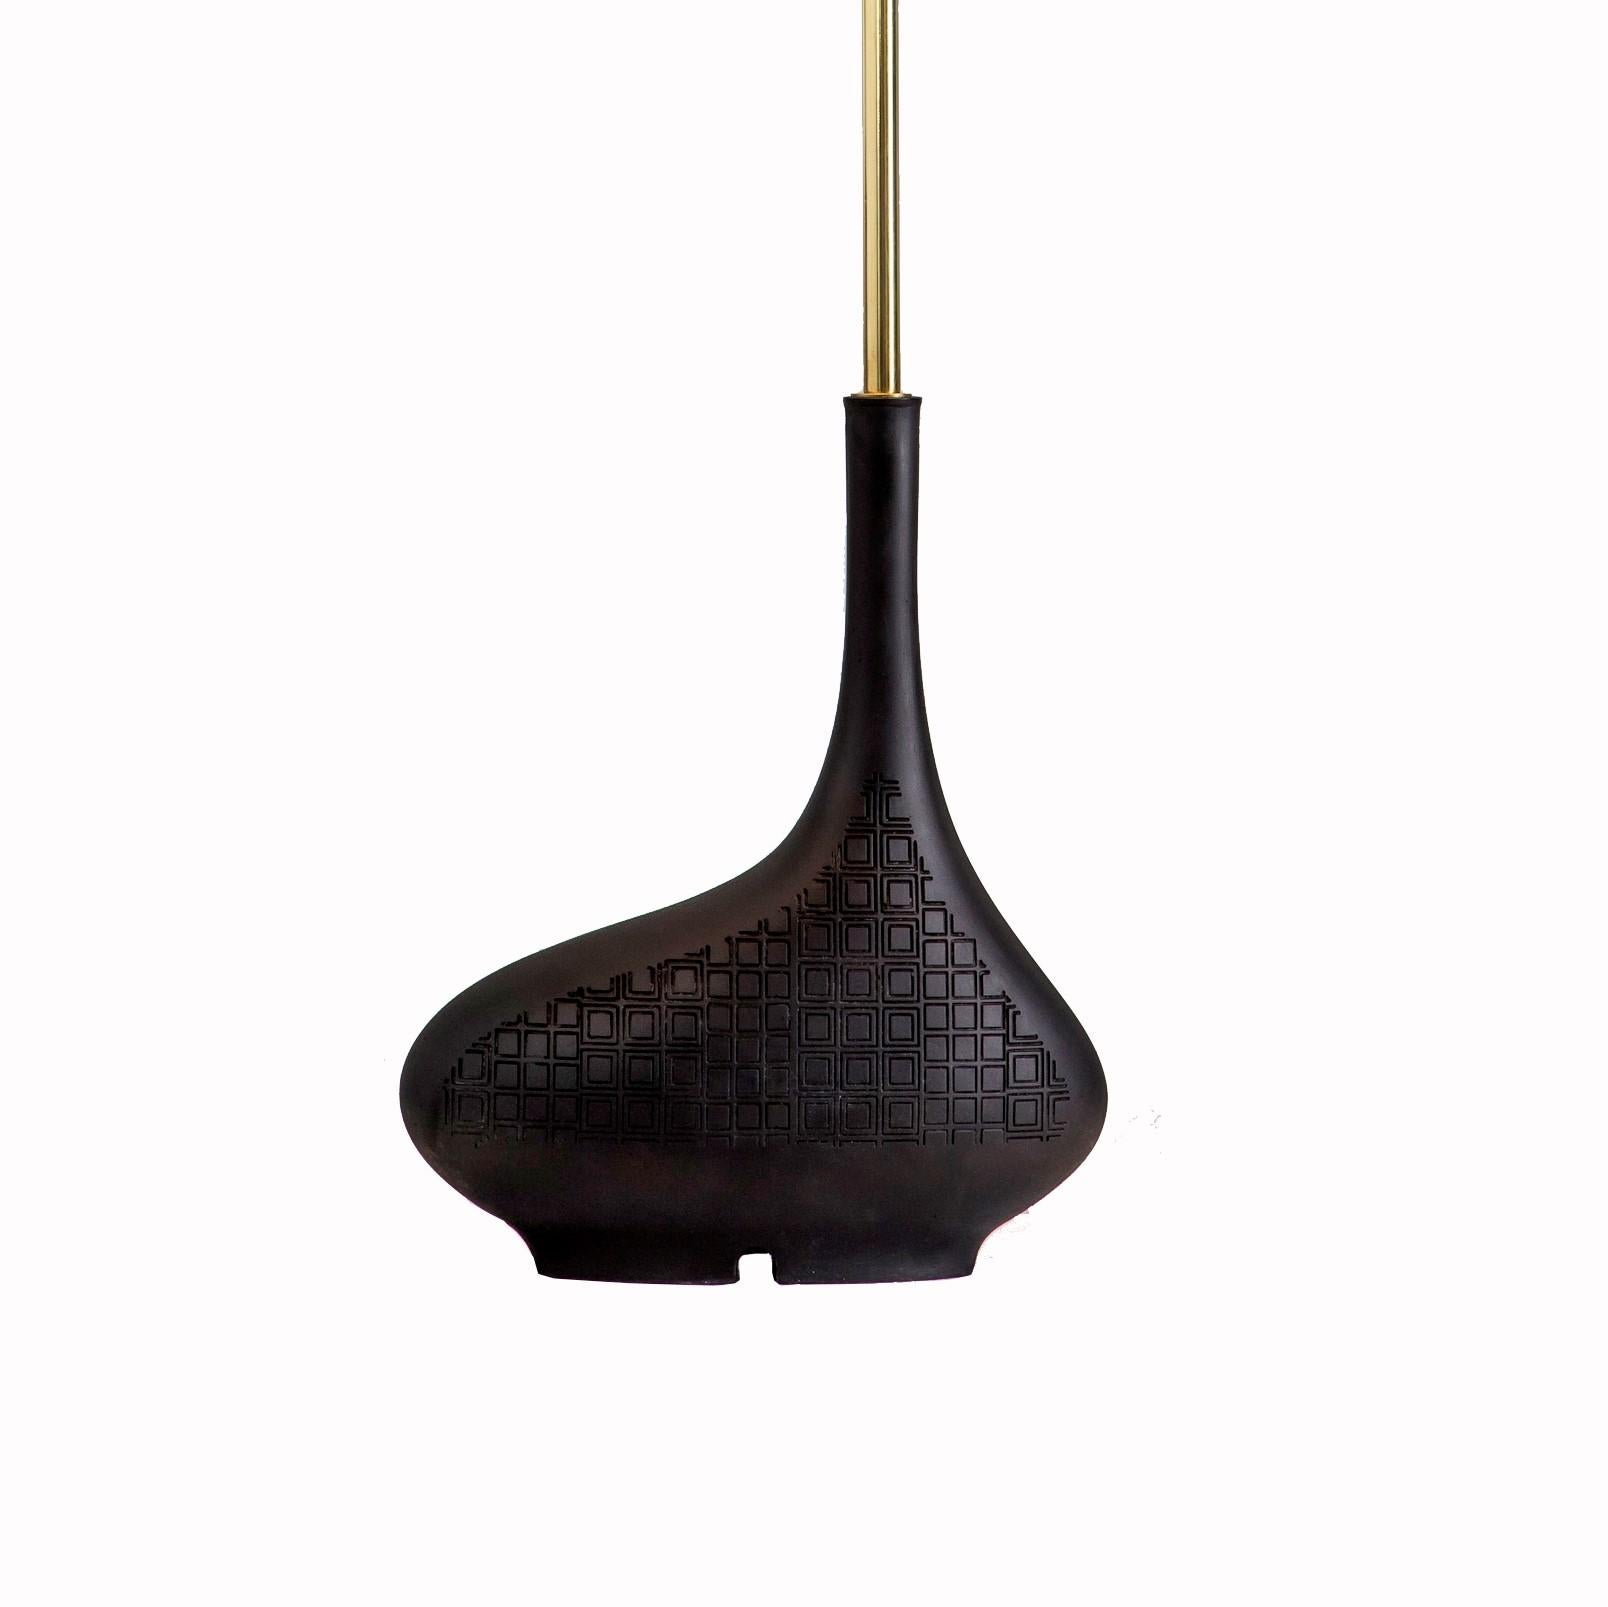 Black Pod single table lamp by Egg Designs
Dimensions: 30 L x 30 D x 58 H cm
Materials: Composite casting, brass, raffia

Founded by South Africans and life partners, Greg and Roche Dry - Egg is a unique perspective in contemporary furniture